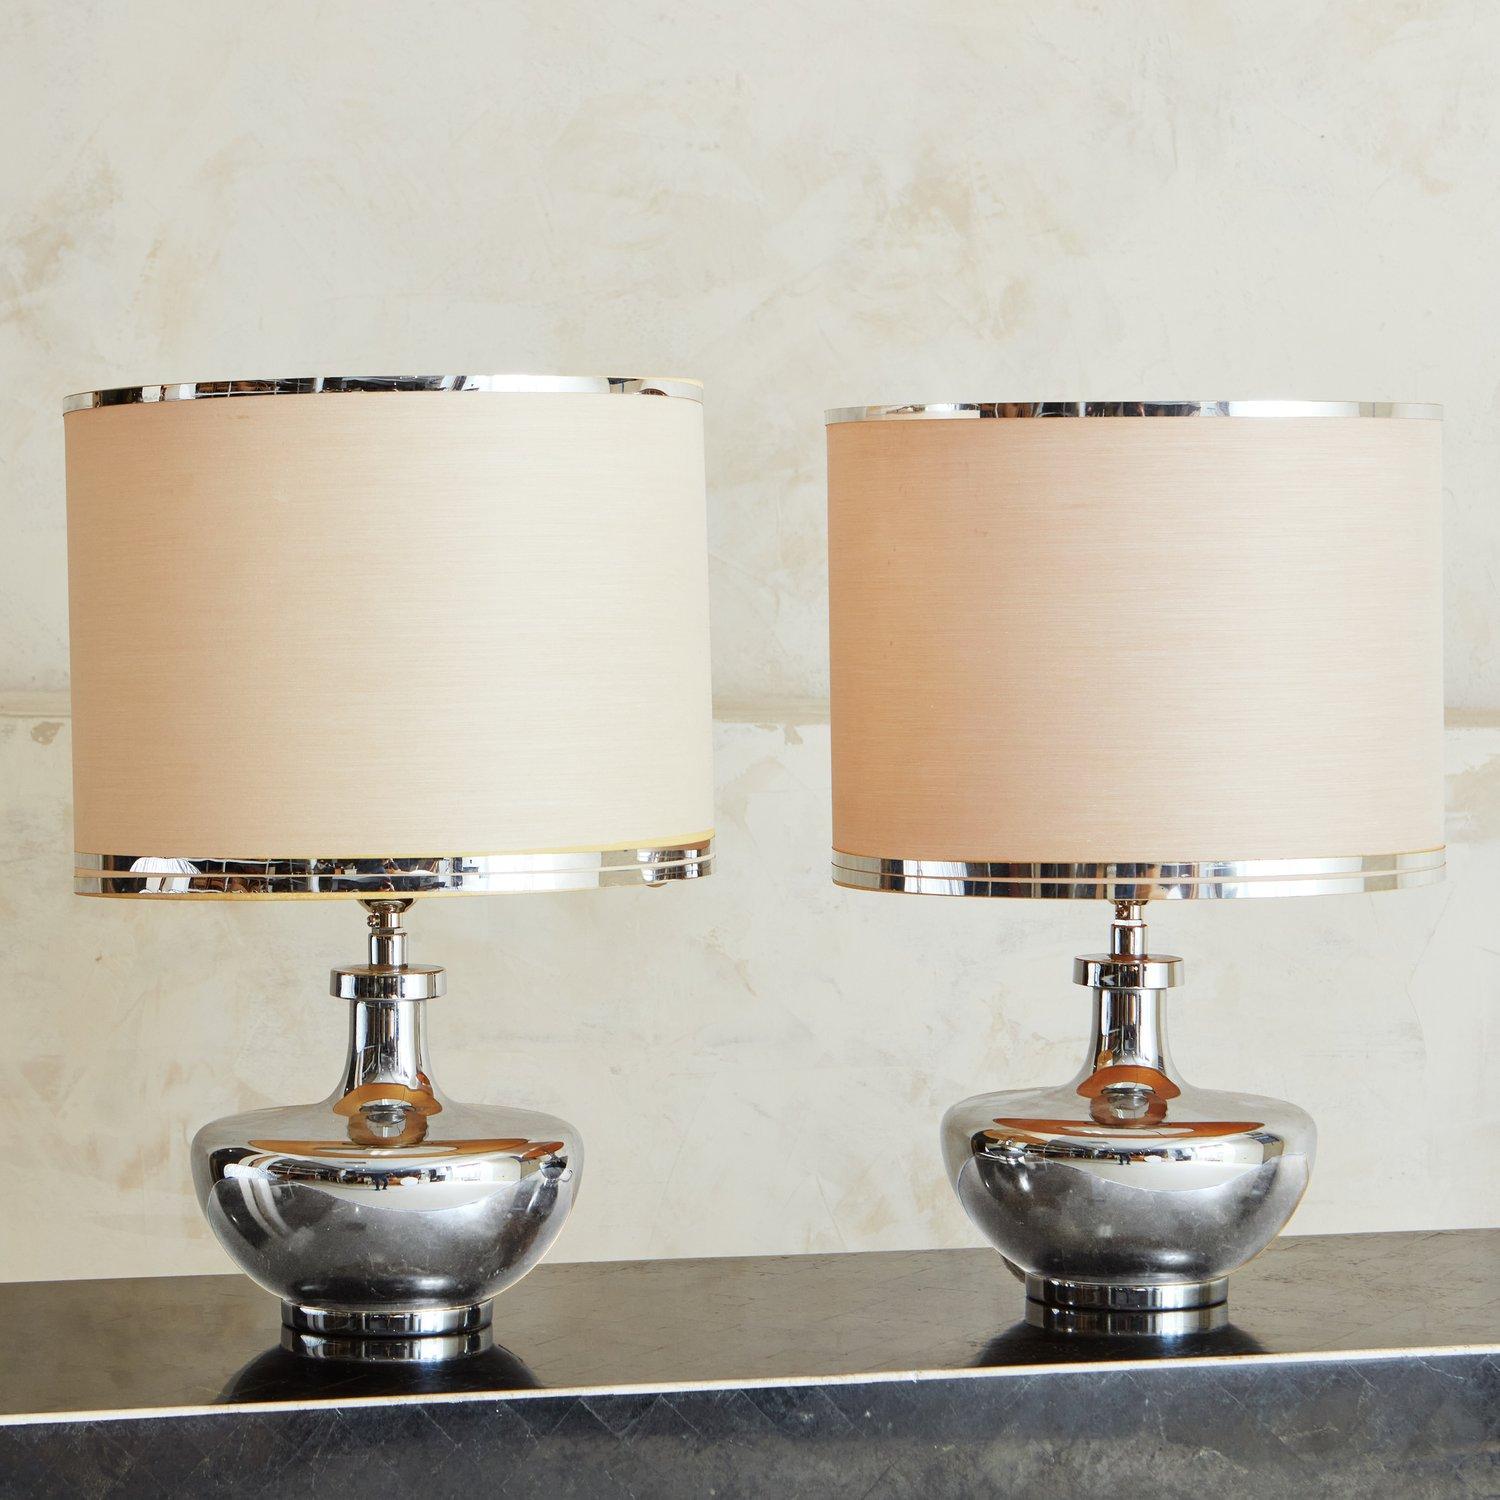 A gorgeous pair of table lamps designed by Estiluz for Maison Valenti in the 1970s. These lamps feature elegant, curved chrome bases and original shades with chrome details. Retains original label ‘E Exclusivos Valenti’ tag. 

Estiluz is an iconic